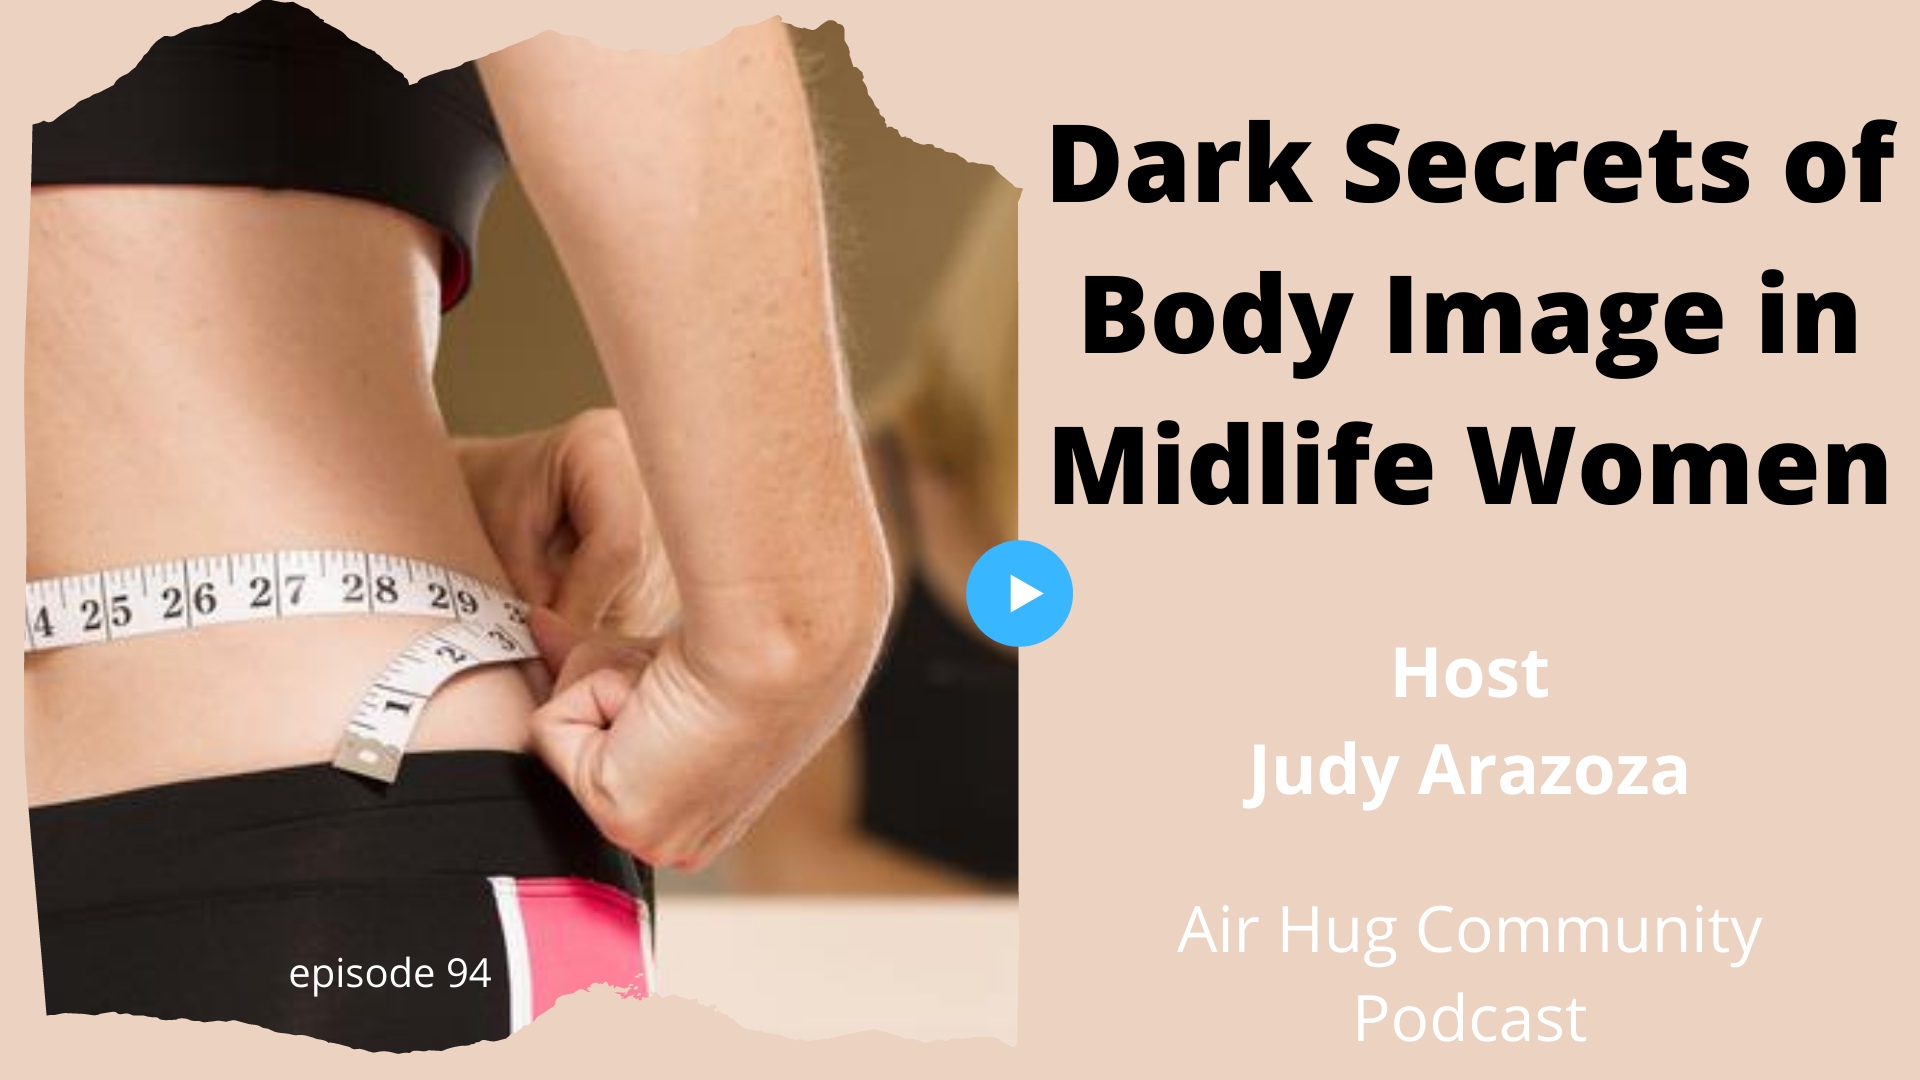 Featured image for “Episode 94: Dark Secrets of Body Image in Midlife Women”